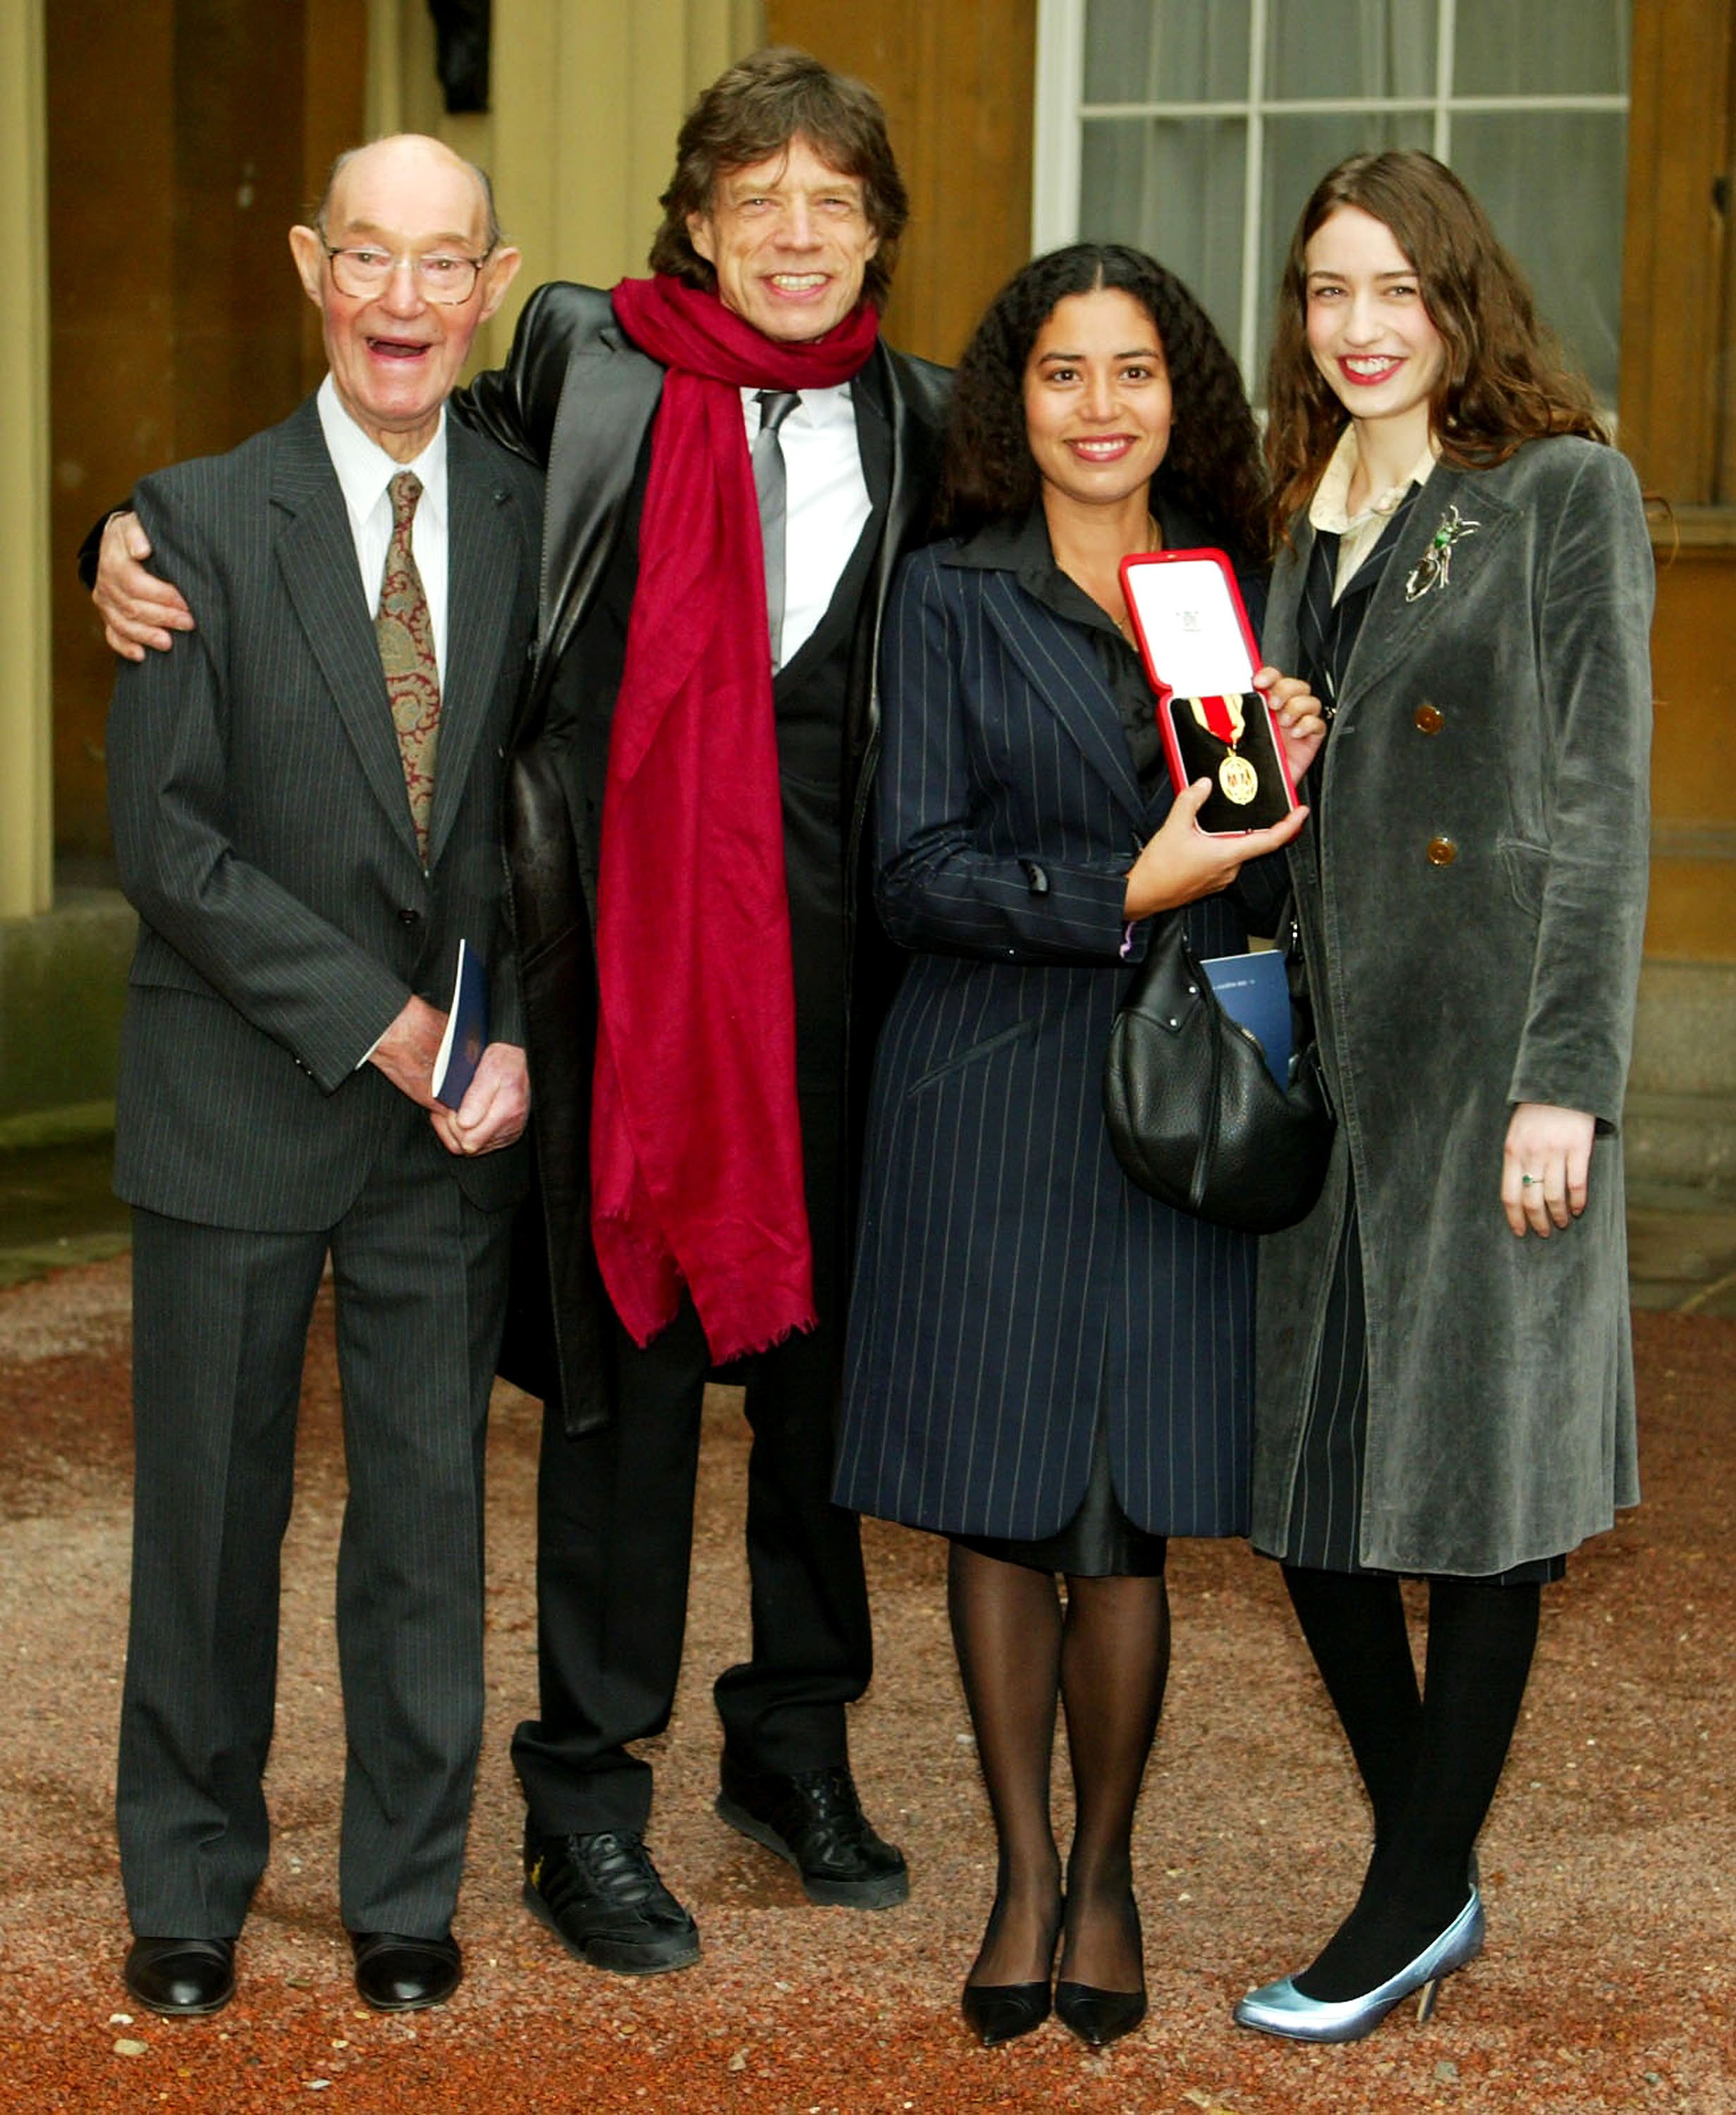 Father Joe with veteran rocker Mick Jagger and daughters Karis and Elizabeth at Buckingham Palace on December 12, 2003 in London. | Source: Getty Images